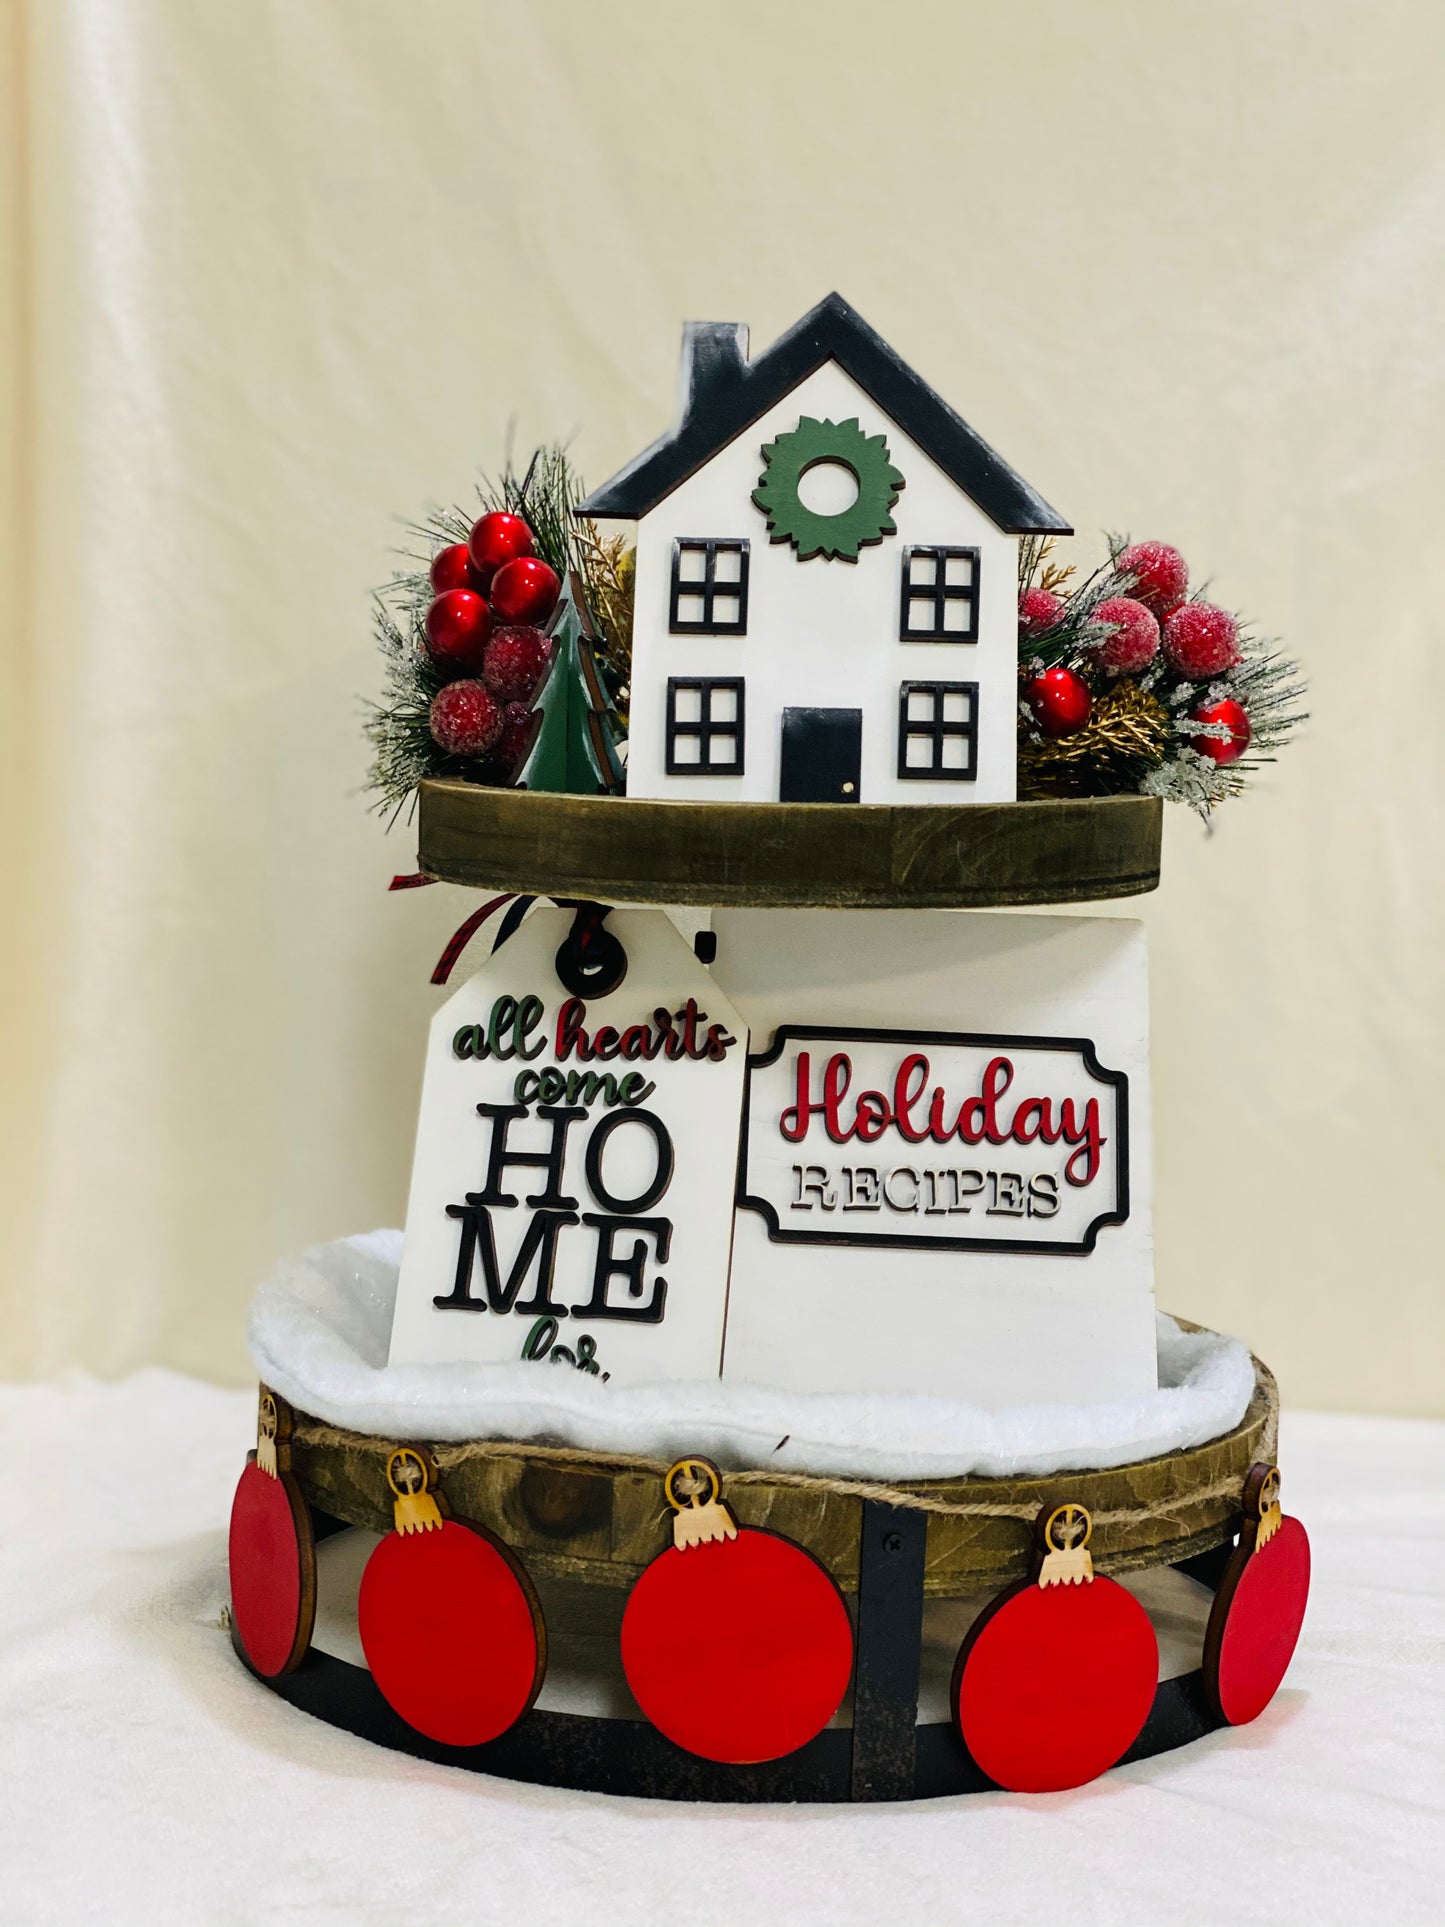 All Hearts Come Home For Christmas Tier Tray Kit